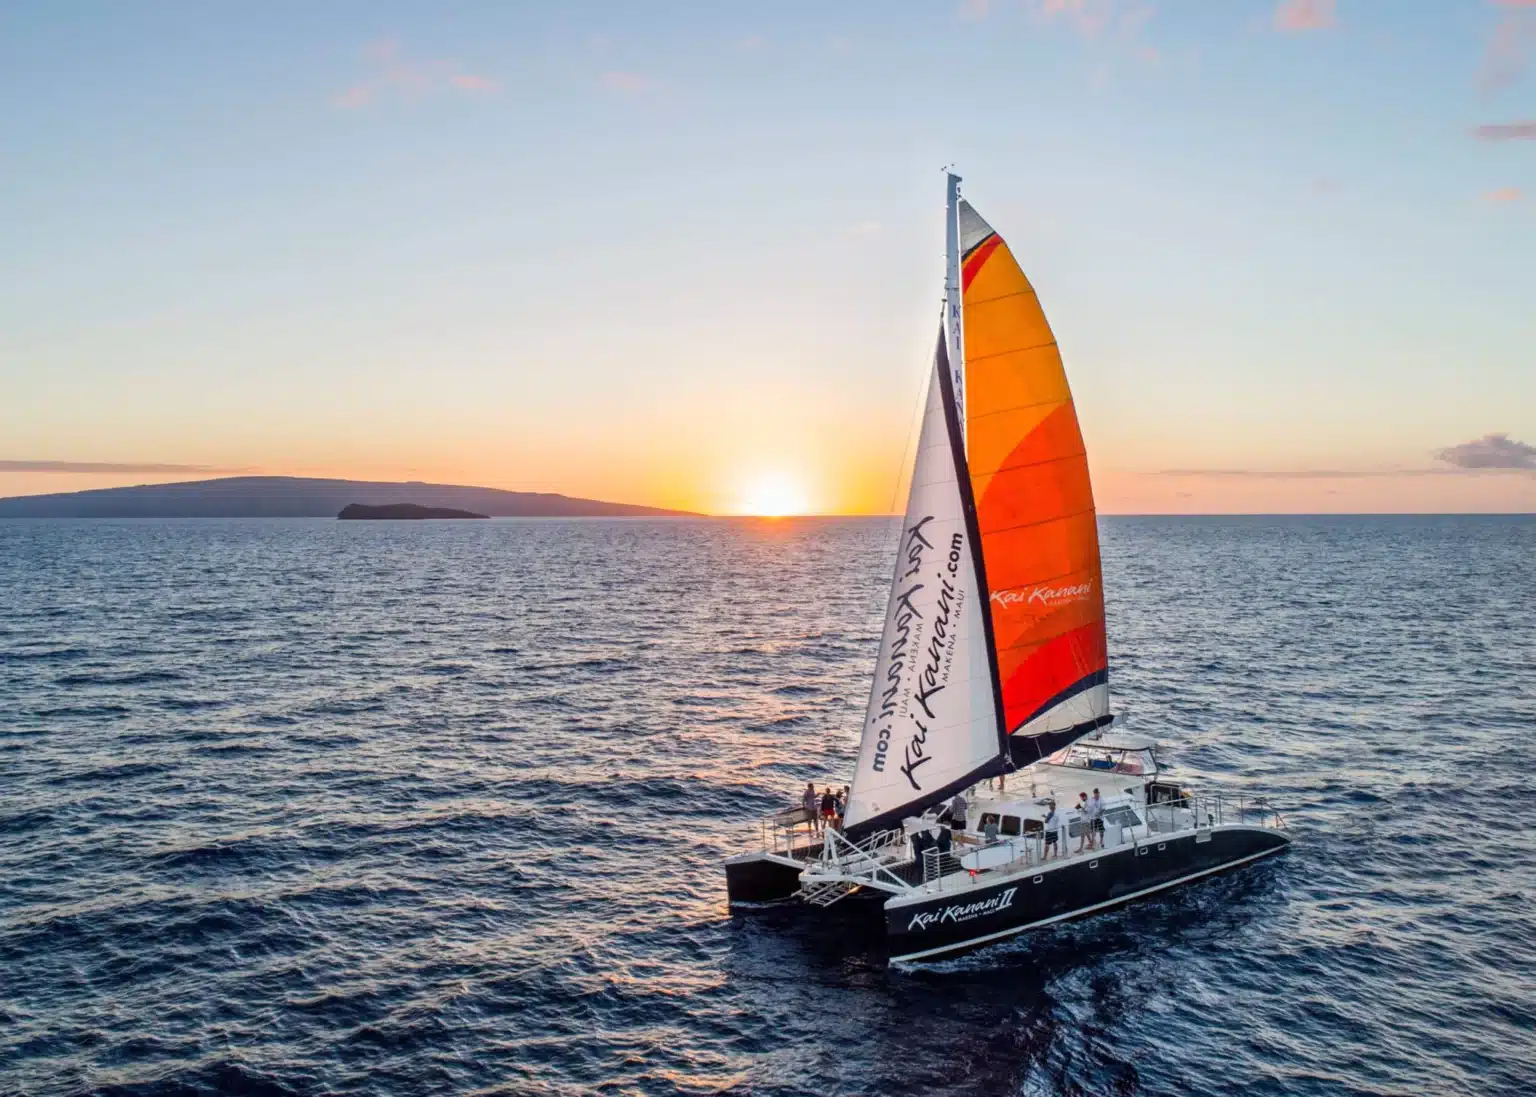 Adventure Sunset Sail: One of Maui's Best Tours